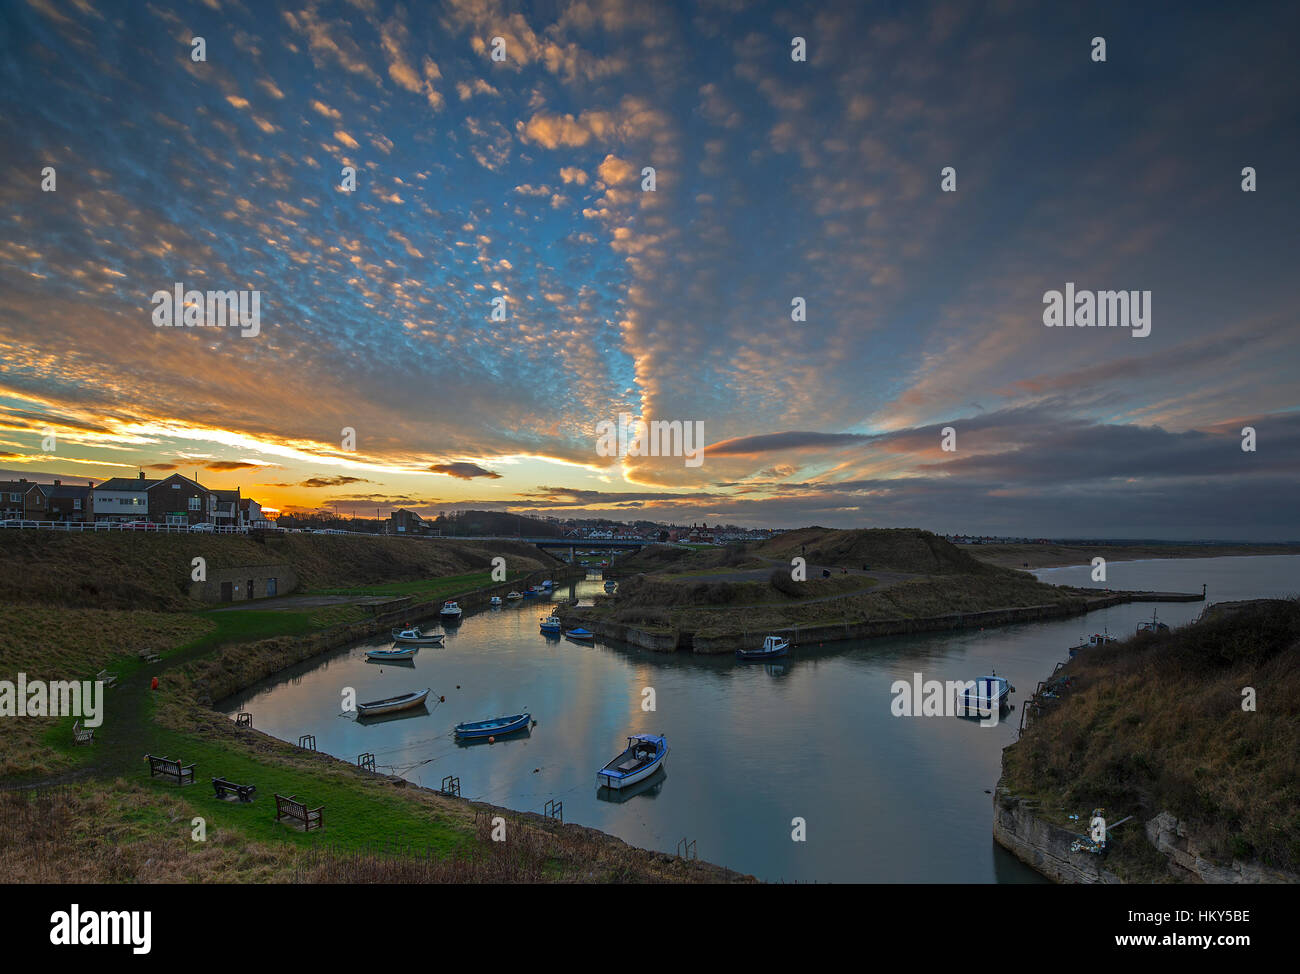 A vibrant sunset in winter over Seaton Sluice harbour looking towards Blyth, Northumberland, England, United Kingdom Stock Photo